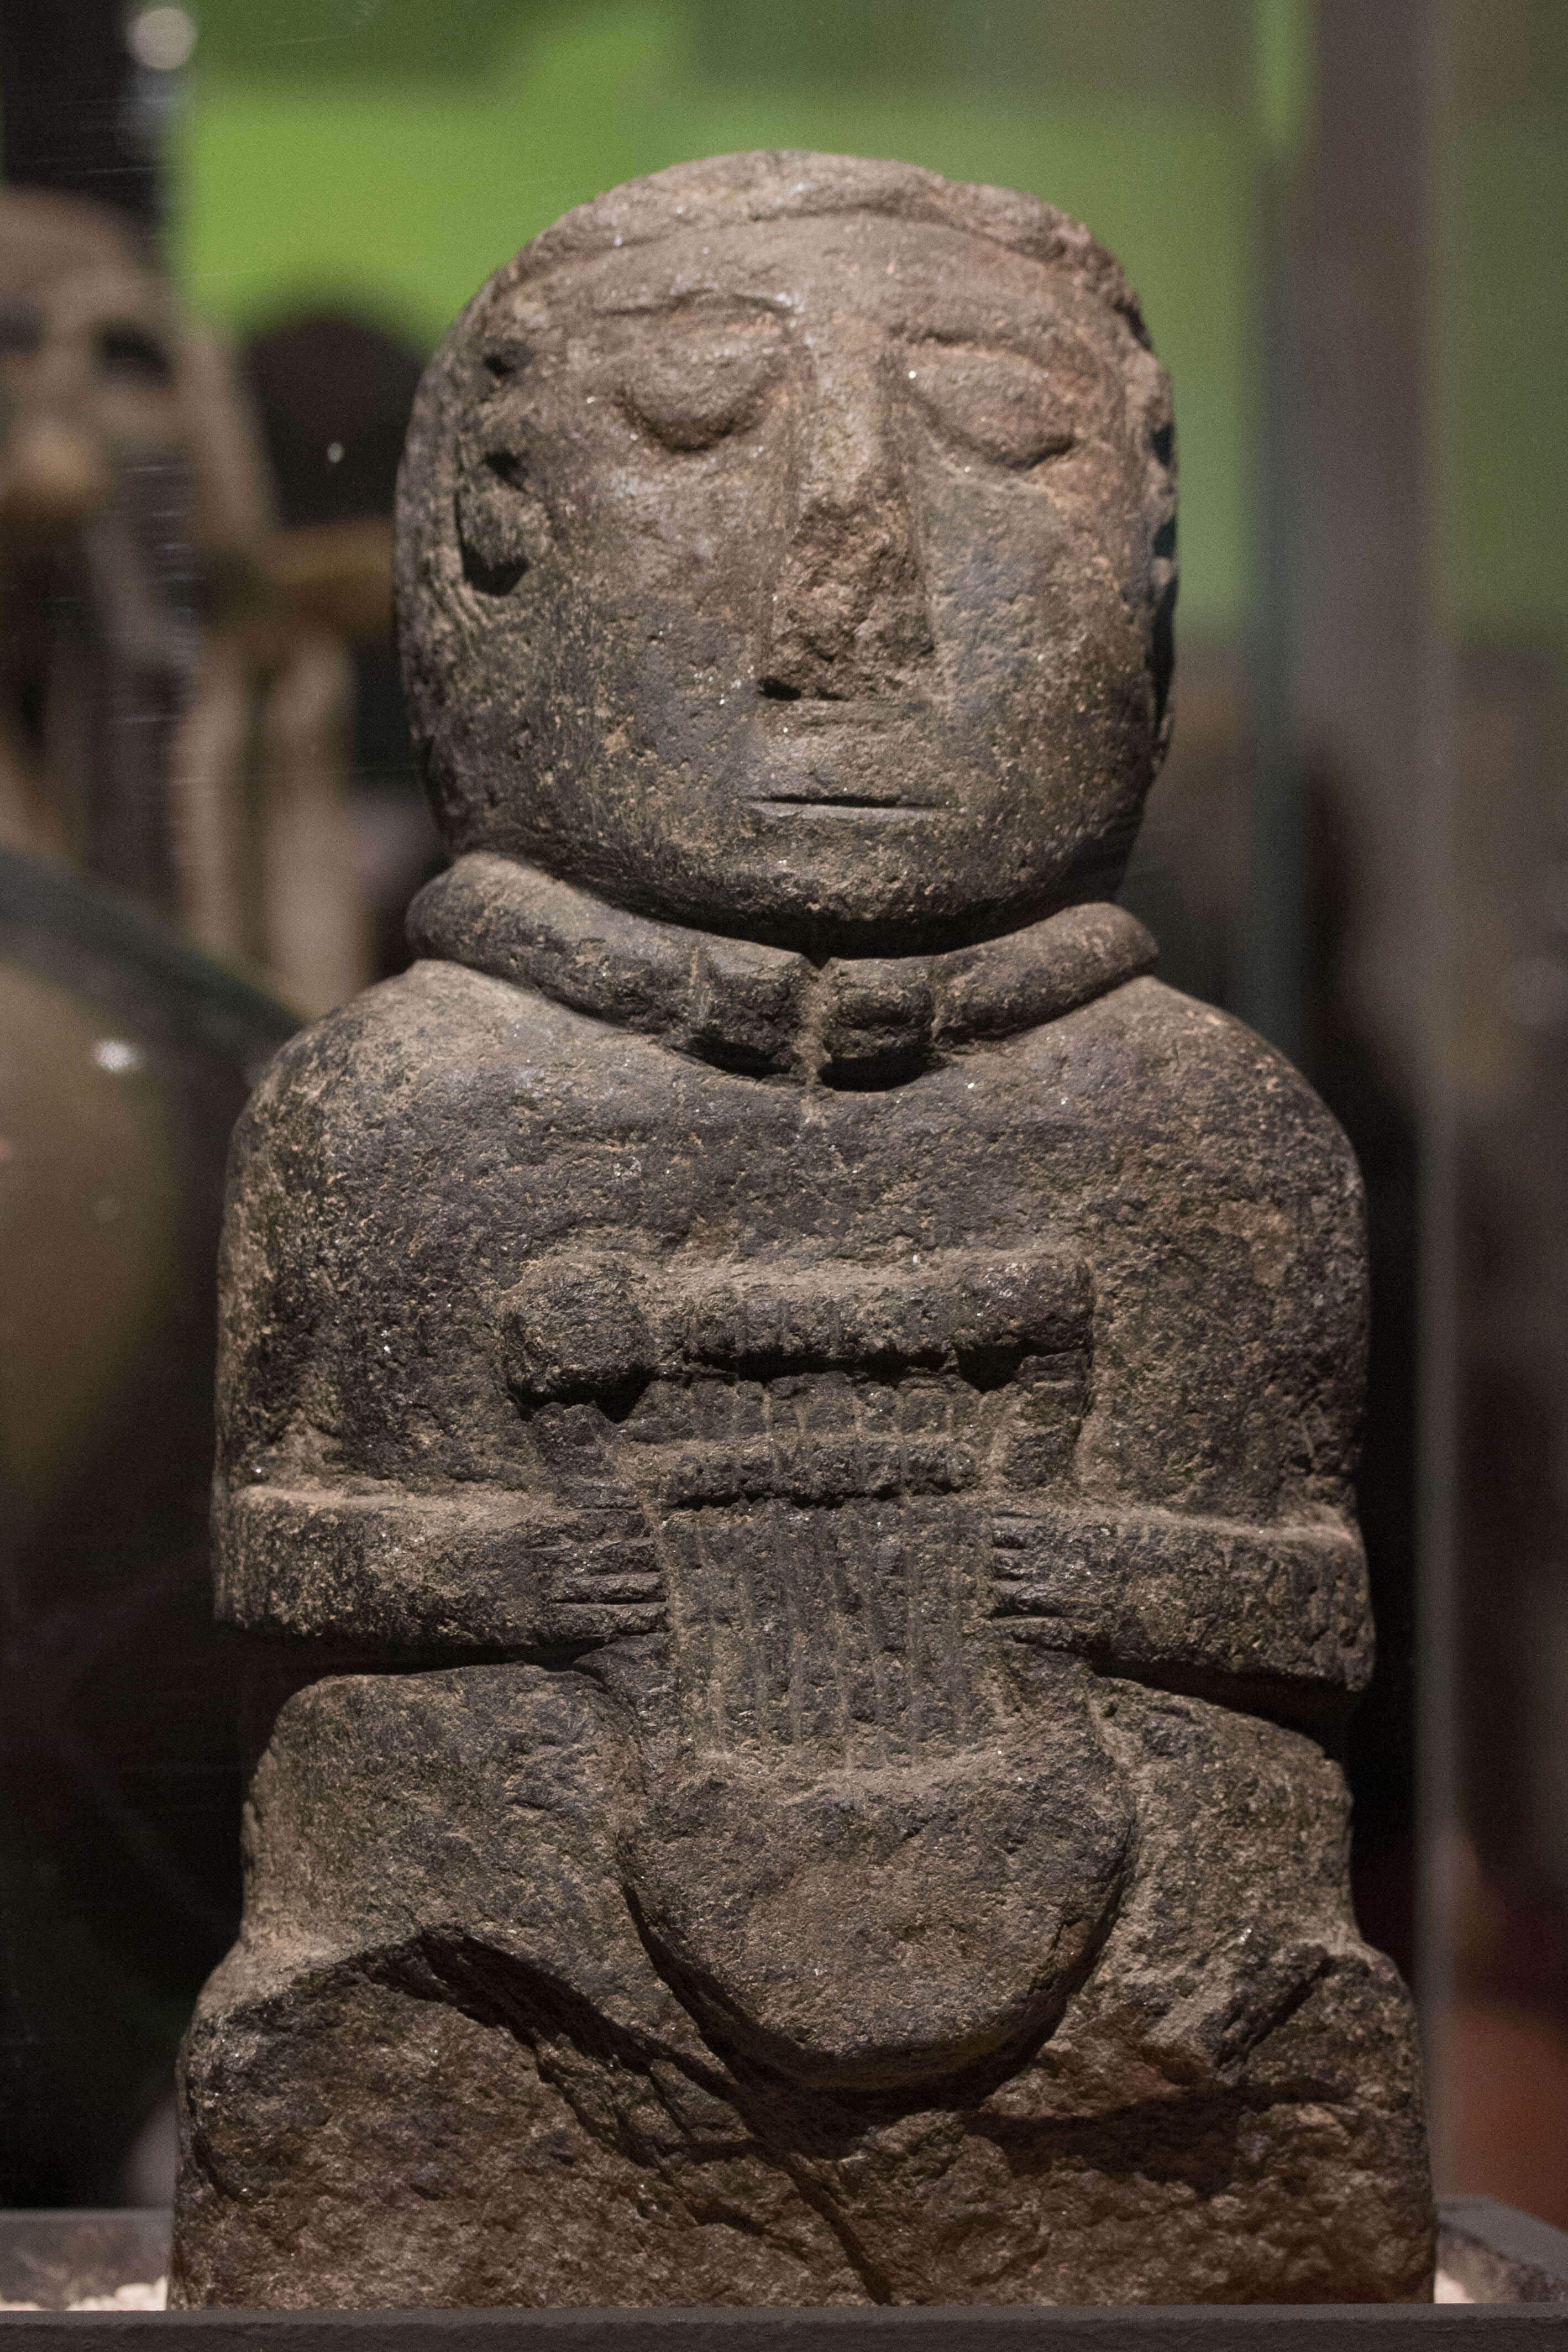 Image of a stone-cut human figure with a lyre